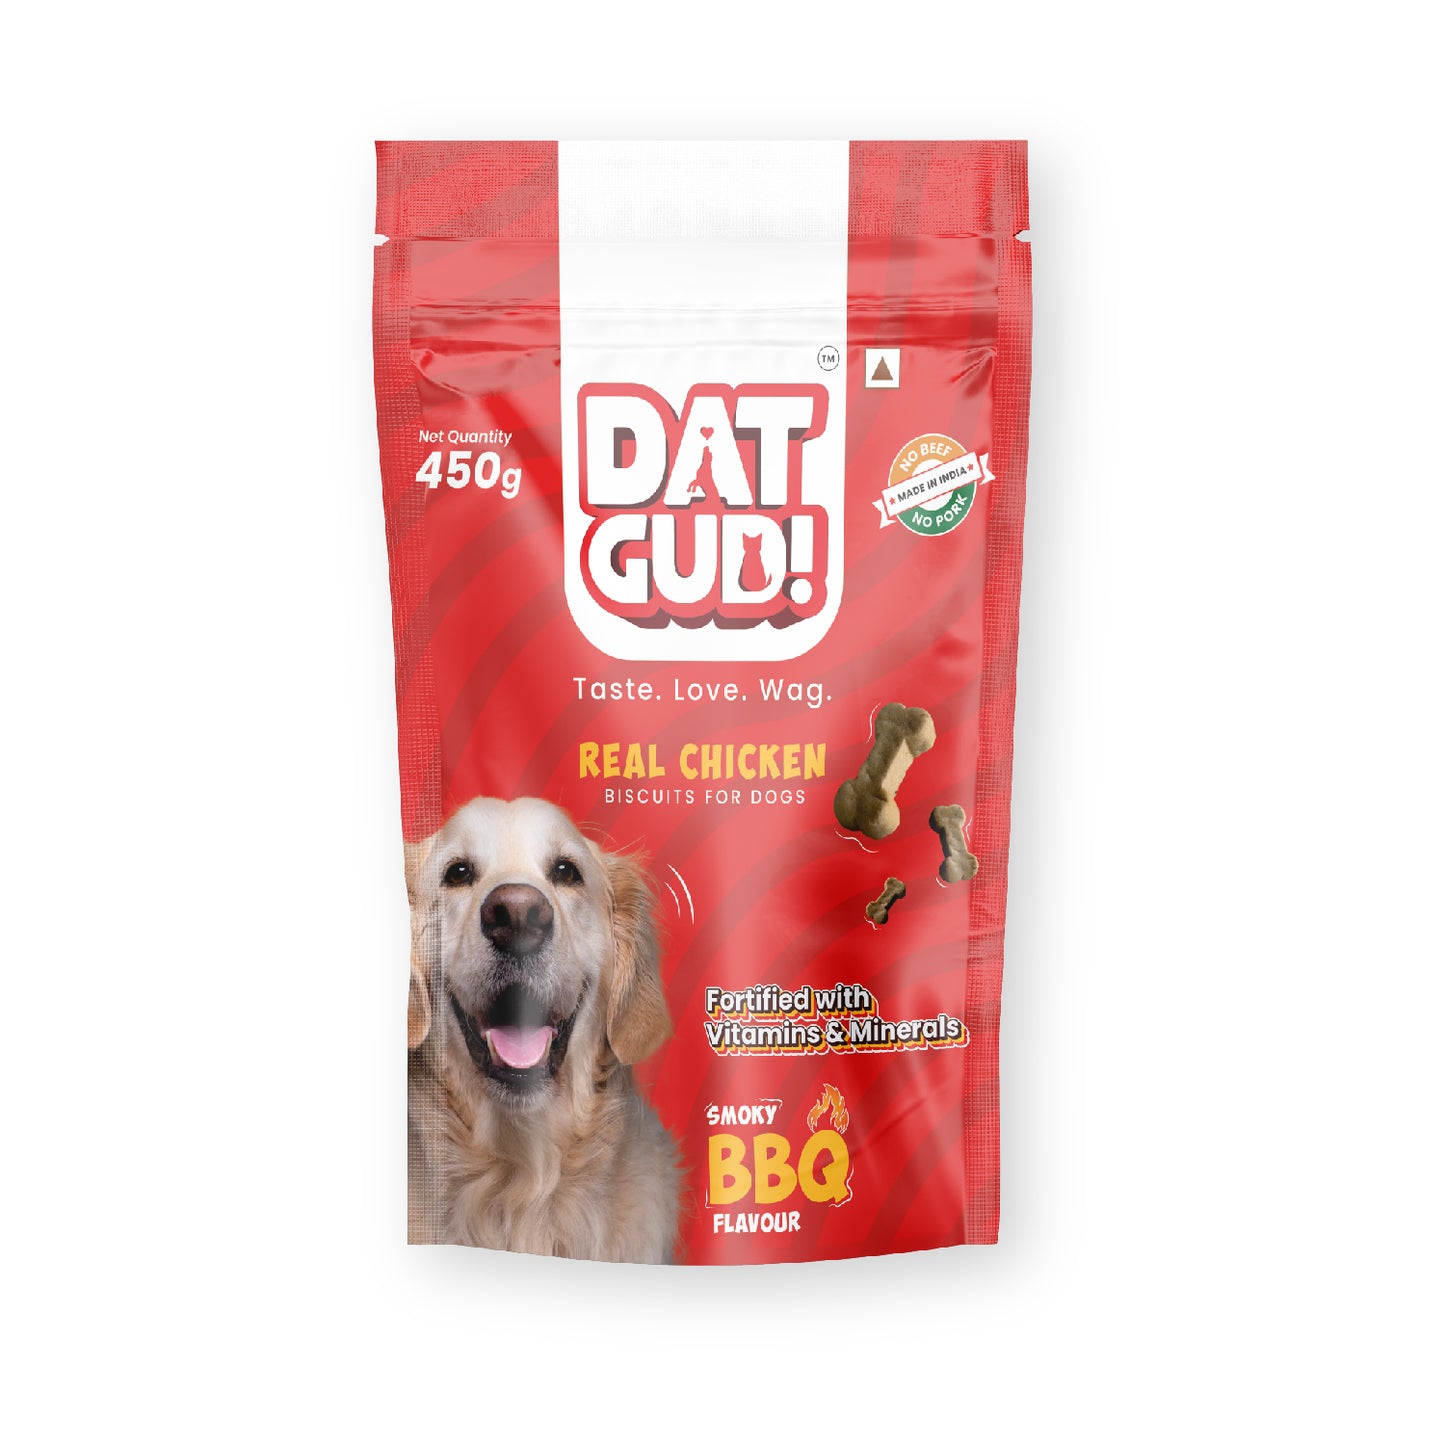 Packshot of DatGud Real chicken biscuits for dogs in smoky barbeque flavour 